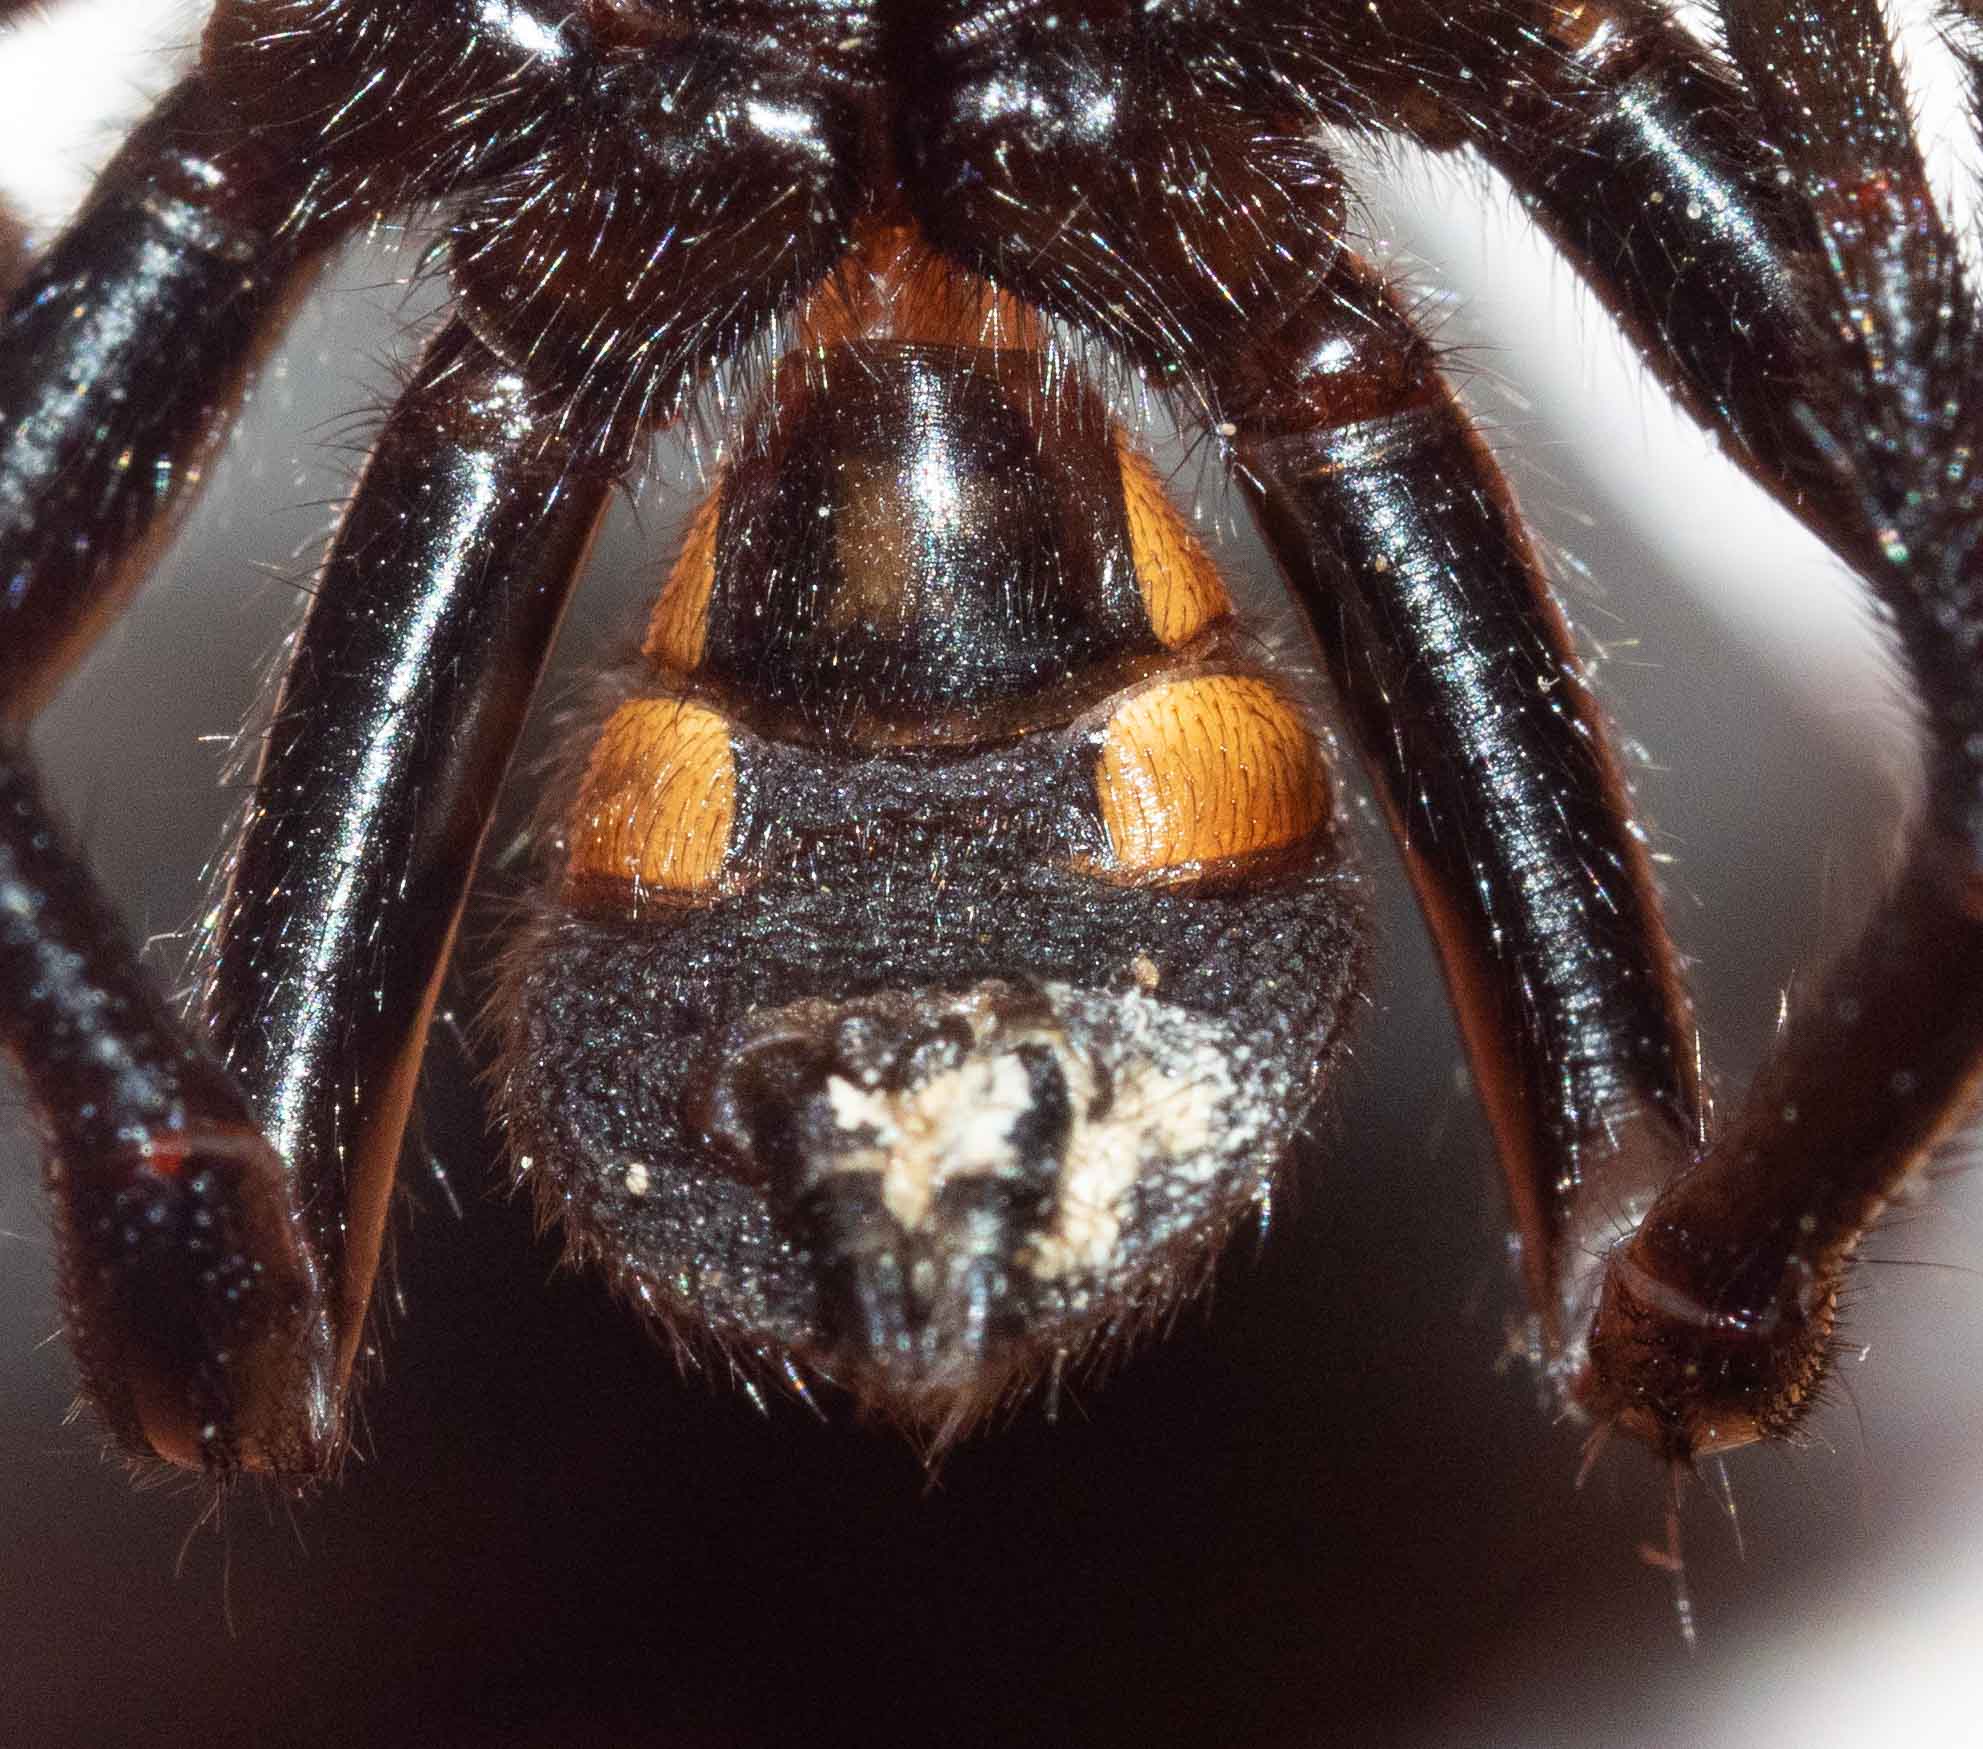 Pain-related spider species. Mygalomorph and araneomorph spiders are